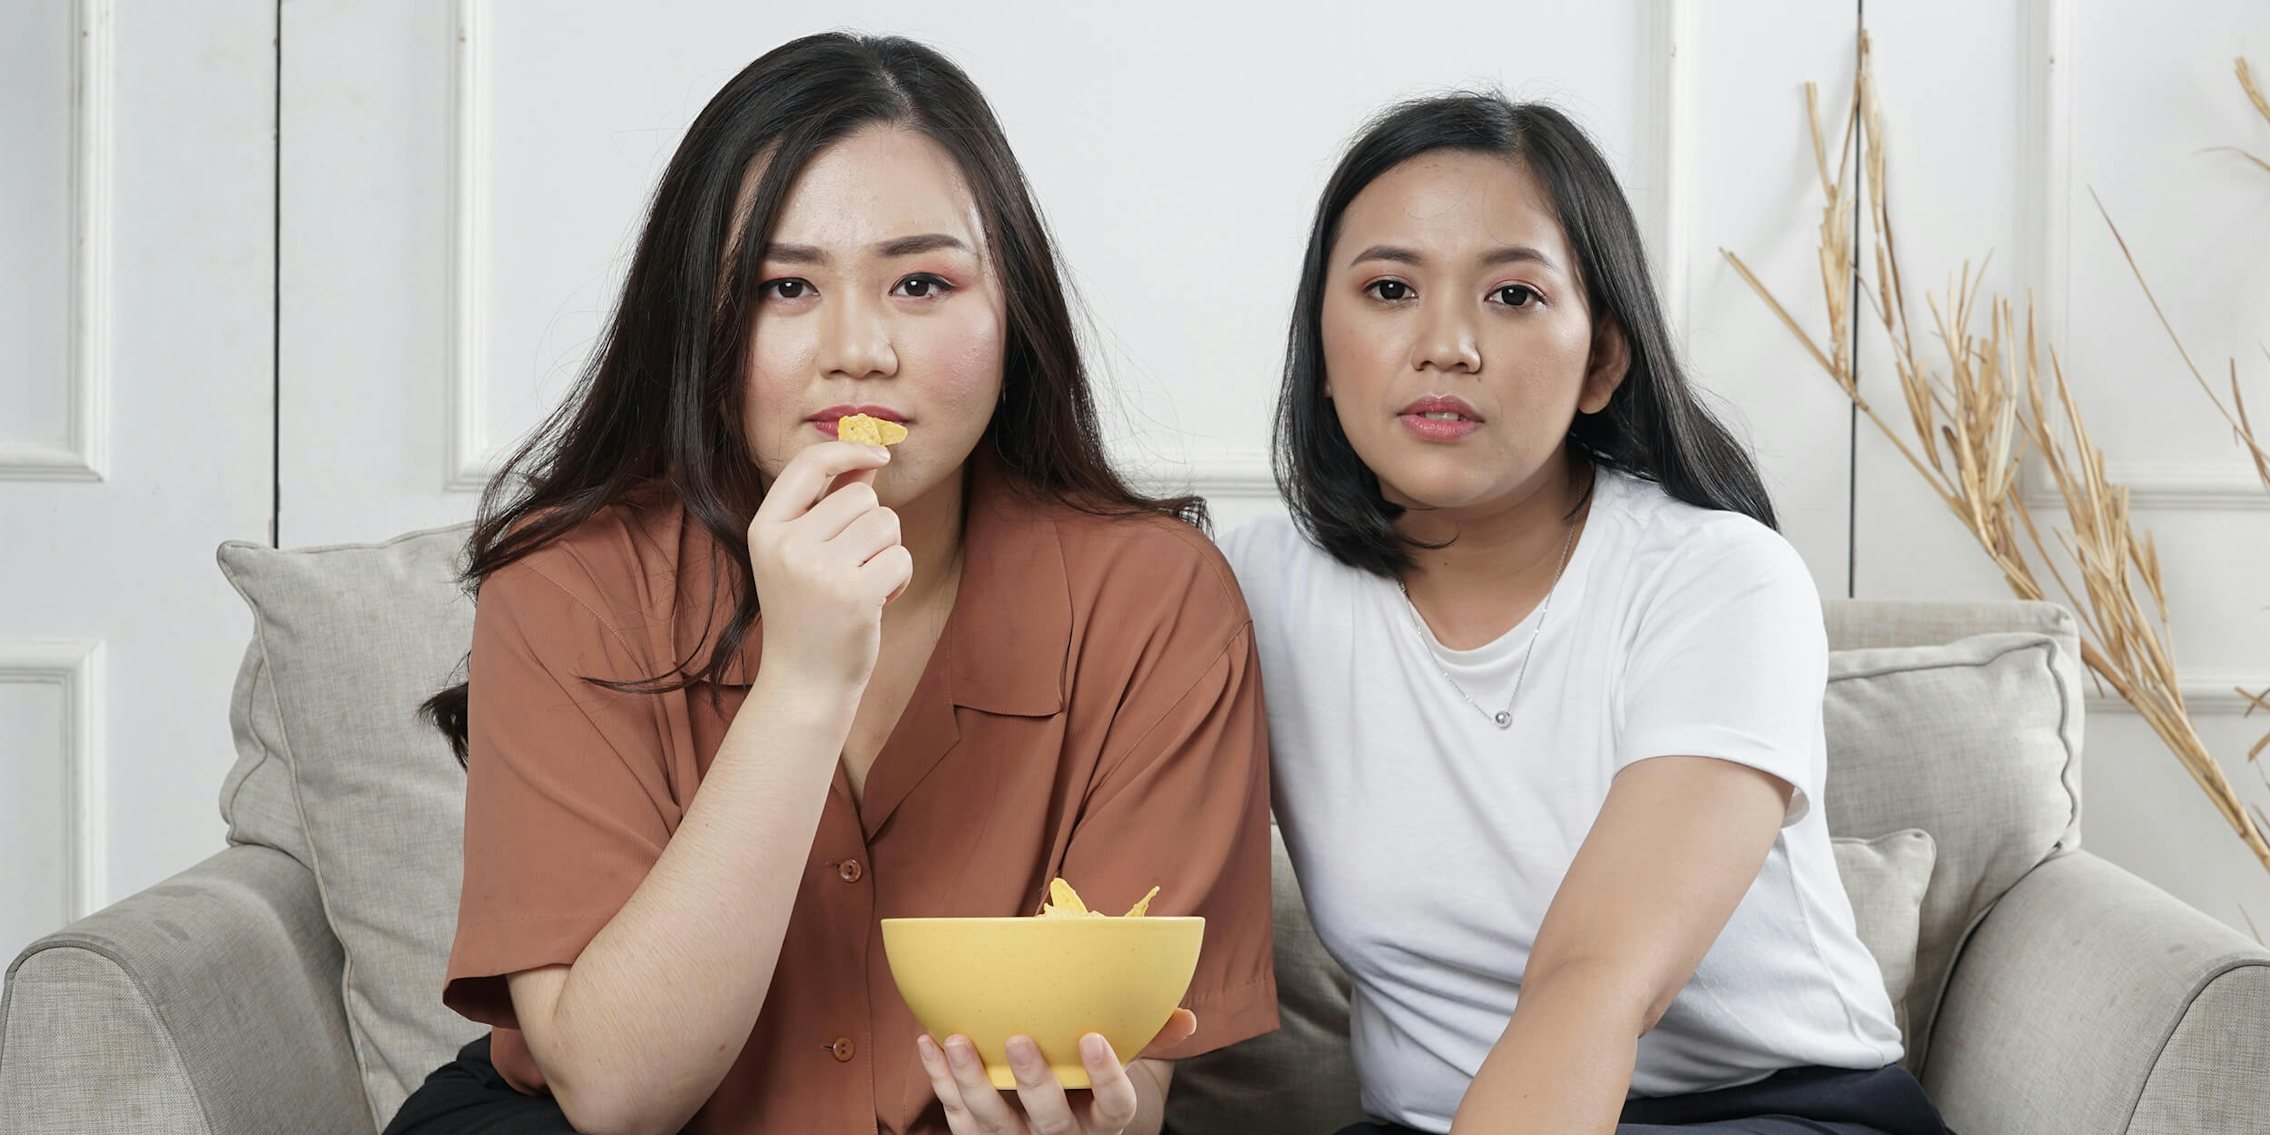 women sitting on couch eating chips